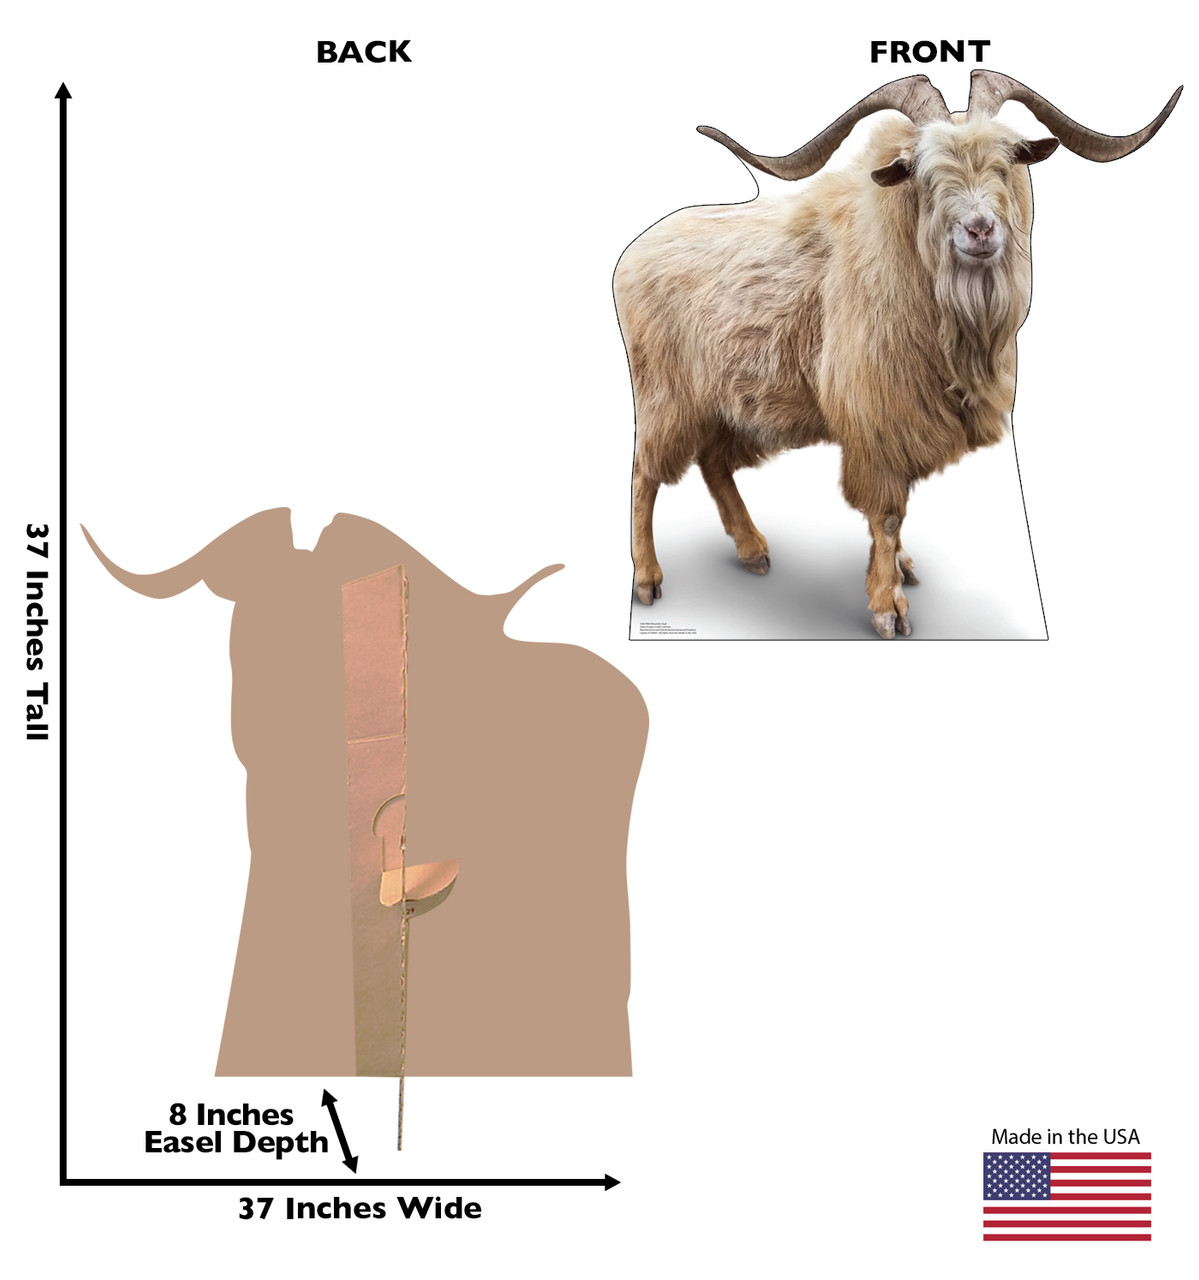 Life-size cardboard standee of a Wild Mountain Goat with back and front dimensions.